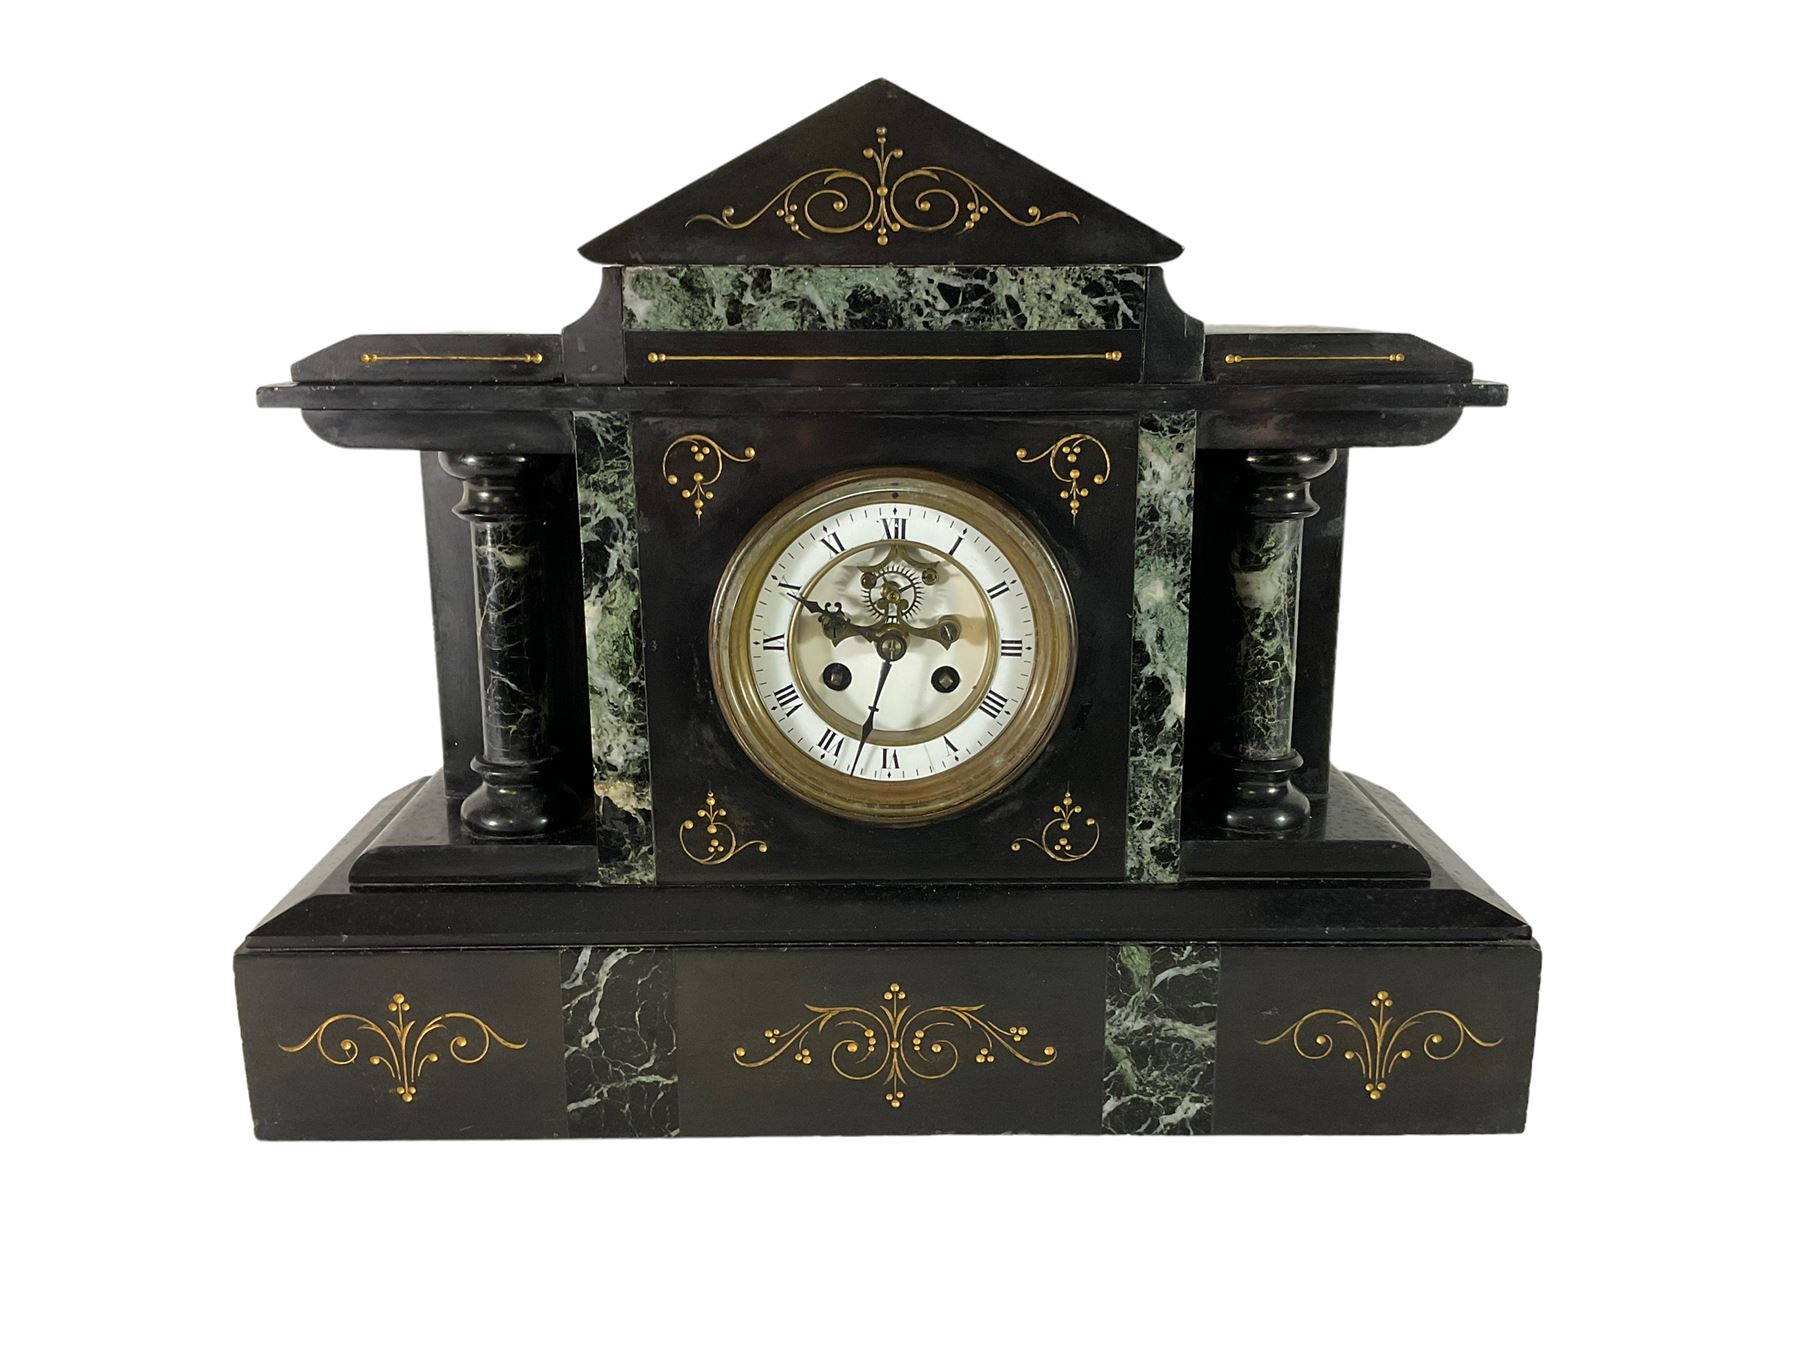 Late 19th century - 8-day Belgium slate and marble mantle clock